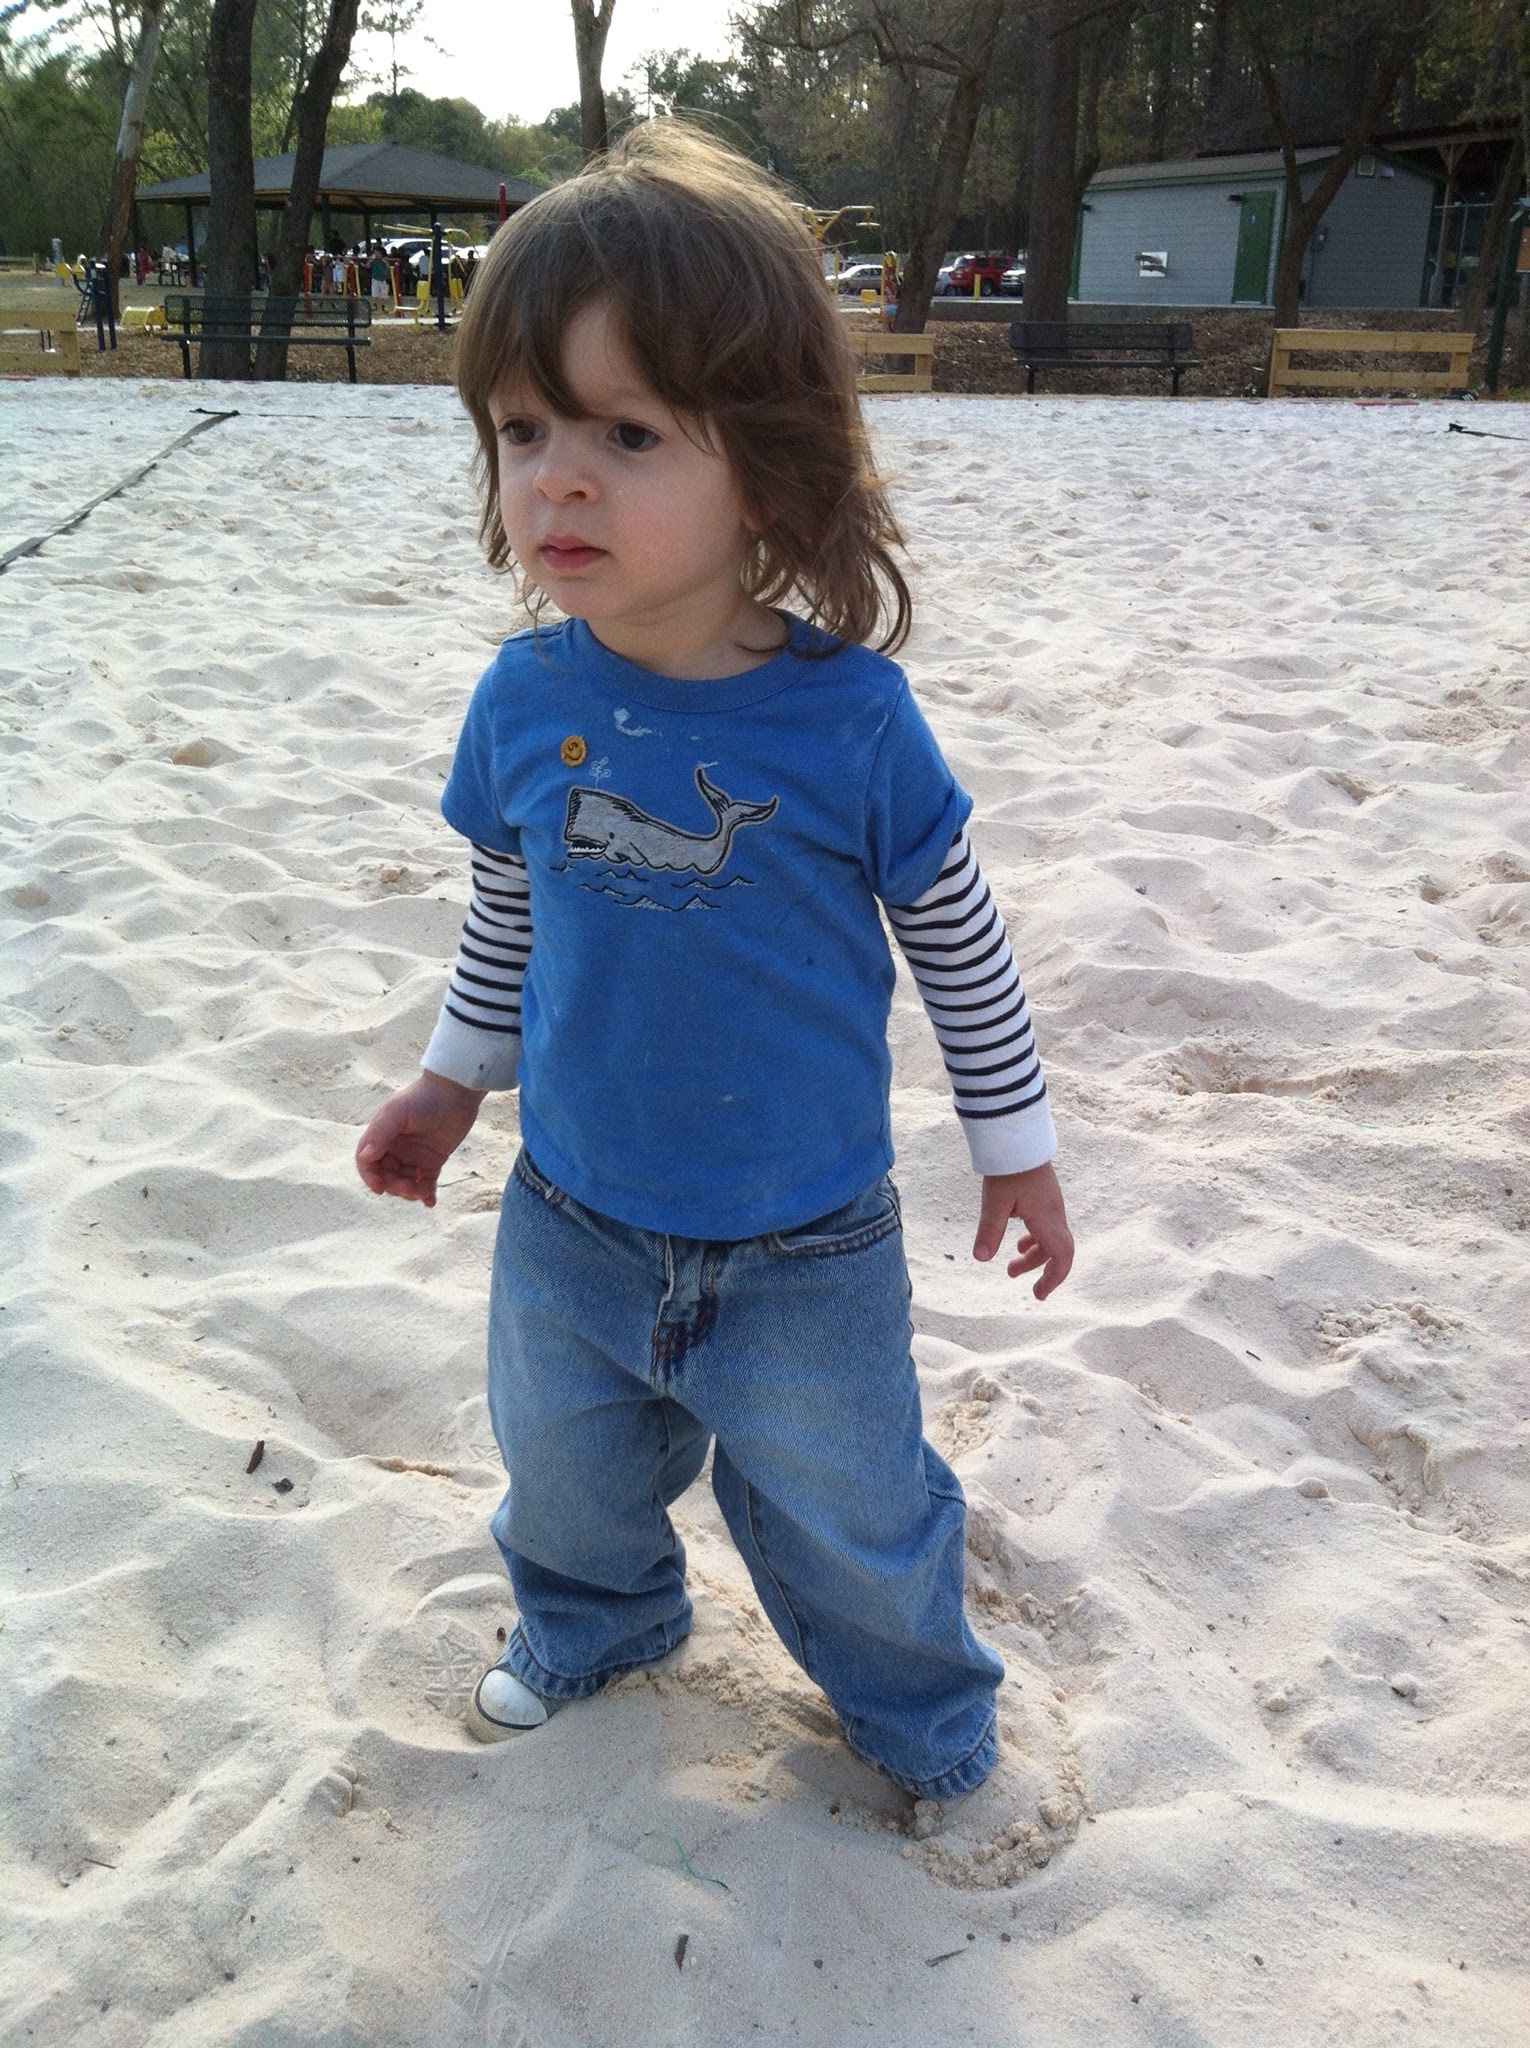 Lucas at 2, playing in the volleyball court sand